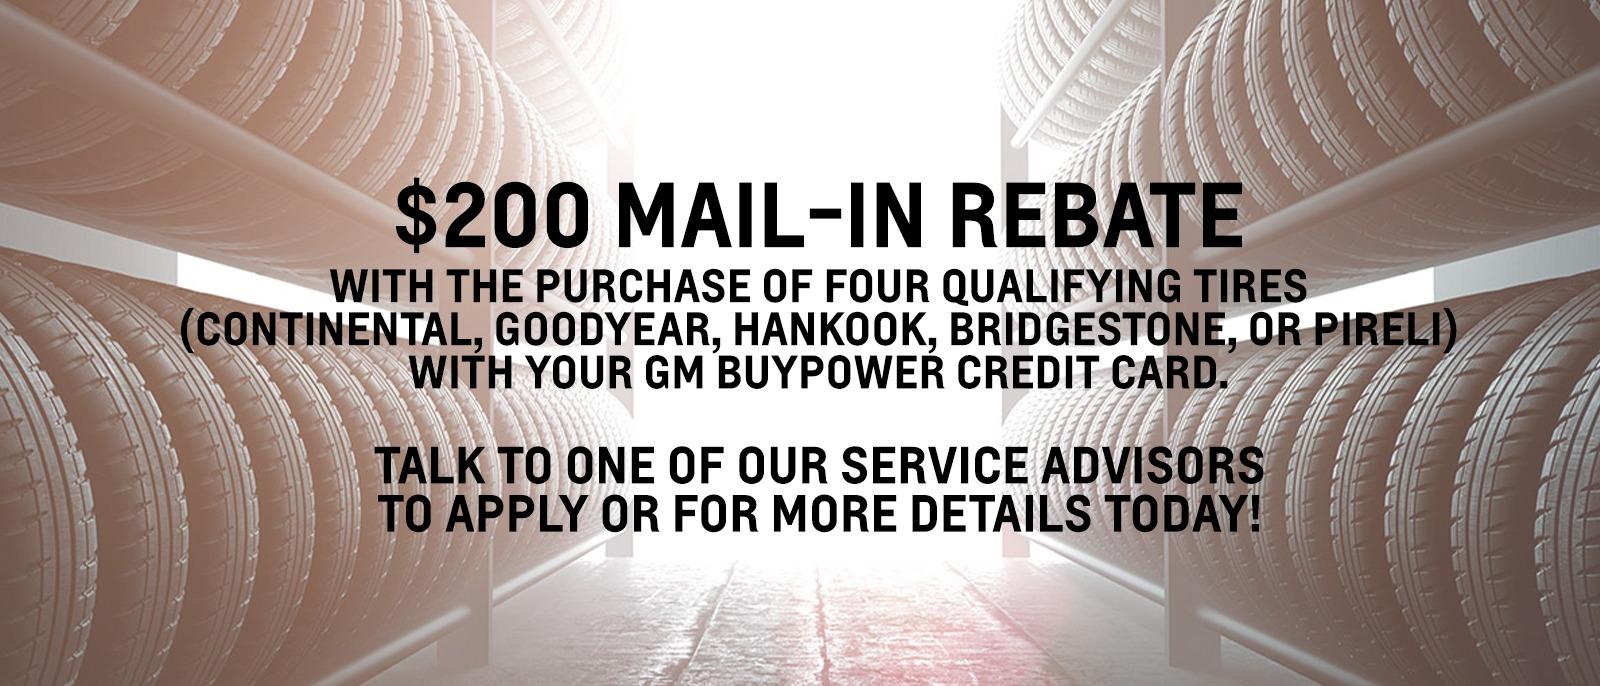 $200 mail in rebate with the purchase of four qualifying tires (Continental, Goodyear, Hankook, Bridgestone, or Pireli) with your GM BuyPower credit card. Talk to one of our service advisors to apply or for more details today!